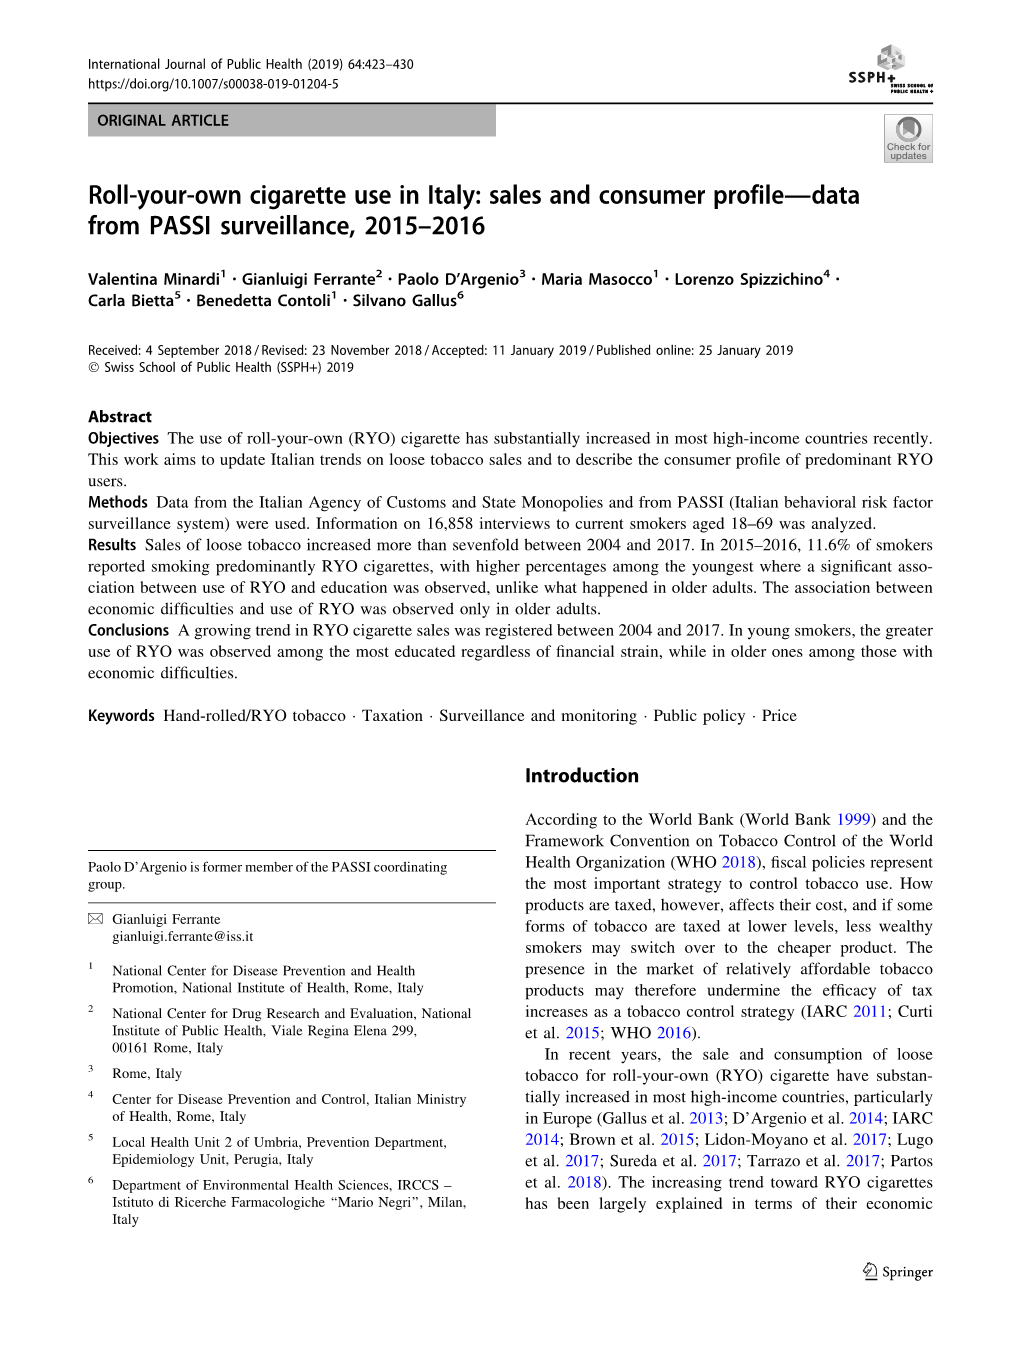 Roll-Your-Own Cigarette Use in Italy: Sales and Consumer Profile—Data from PASSI Surveillance, 2015–2016